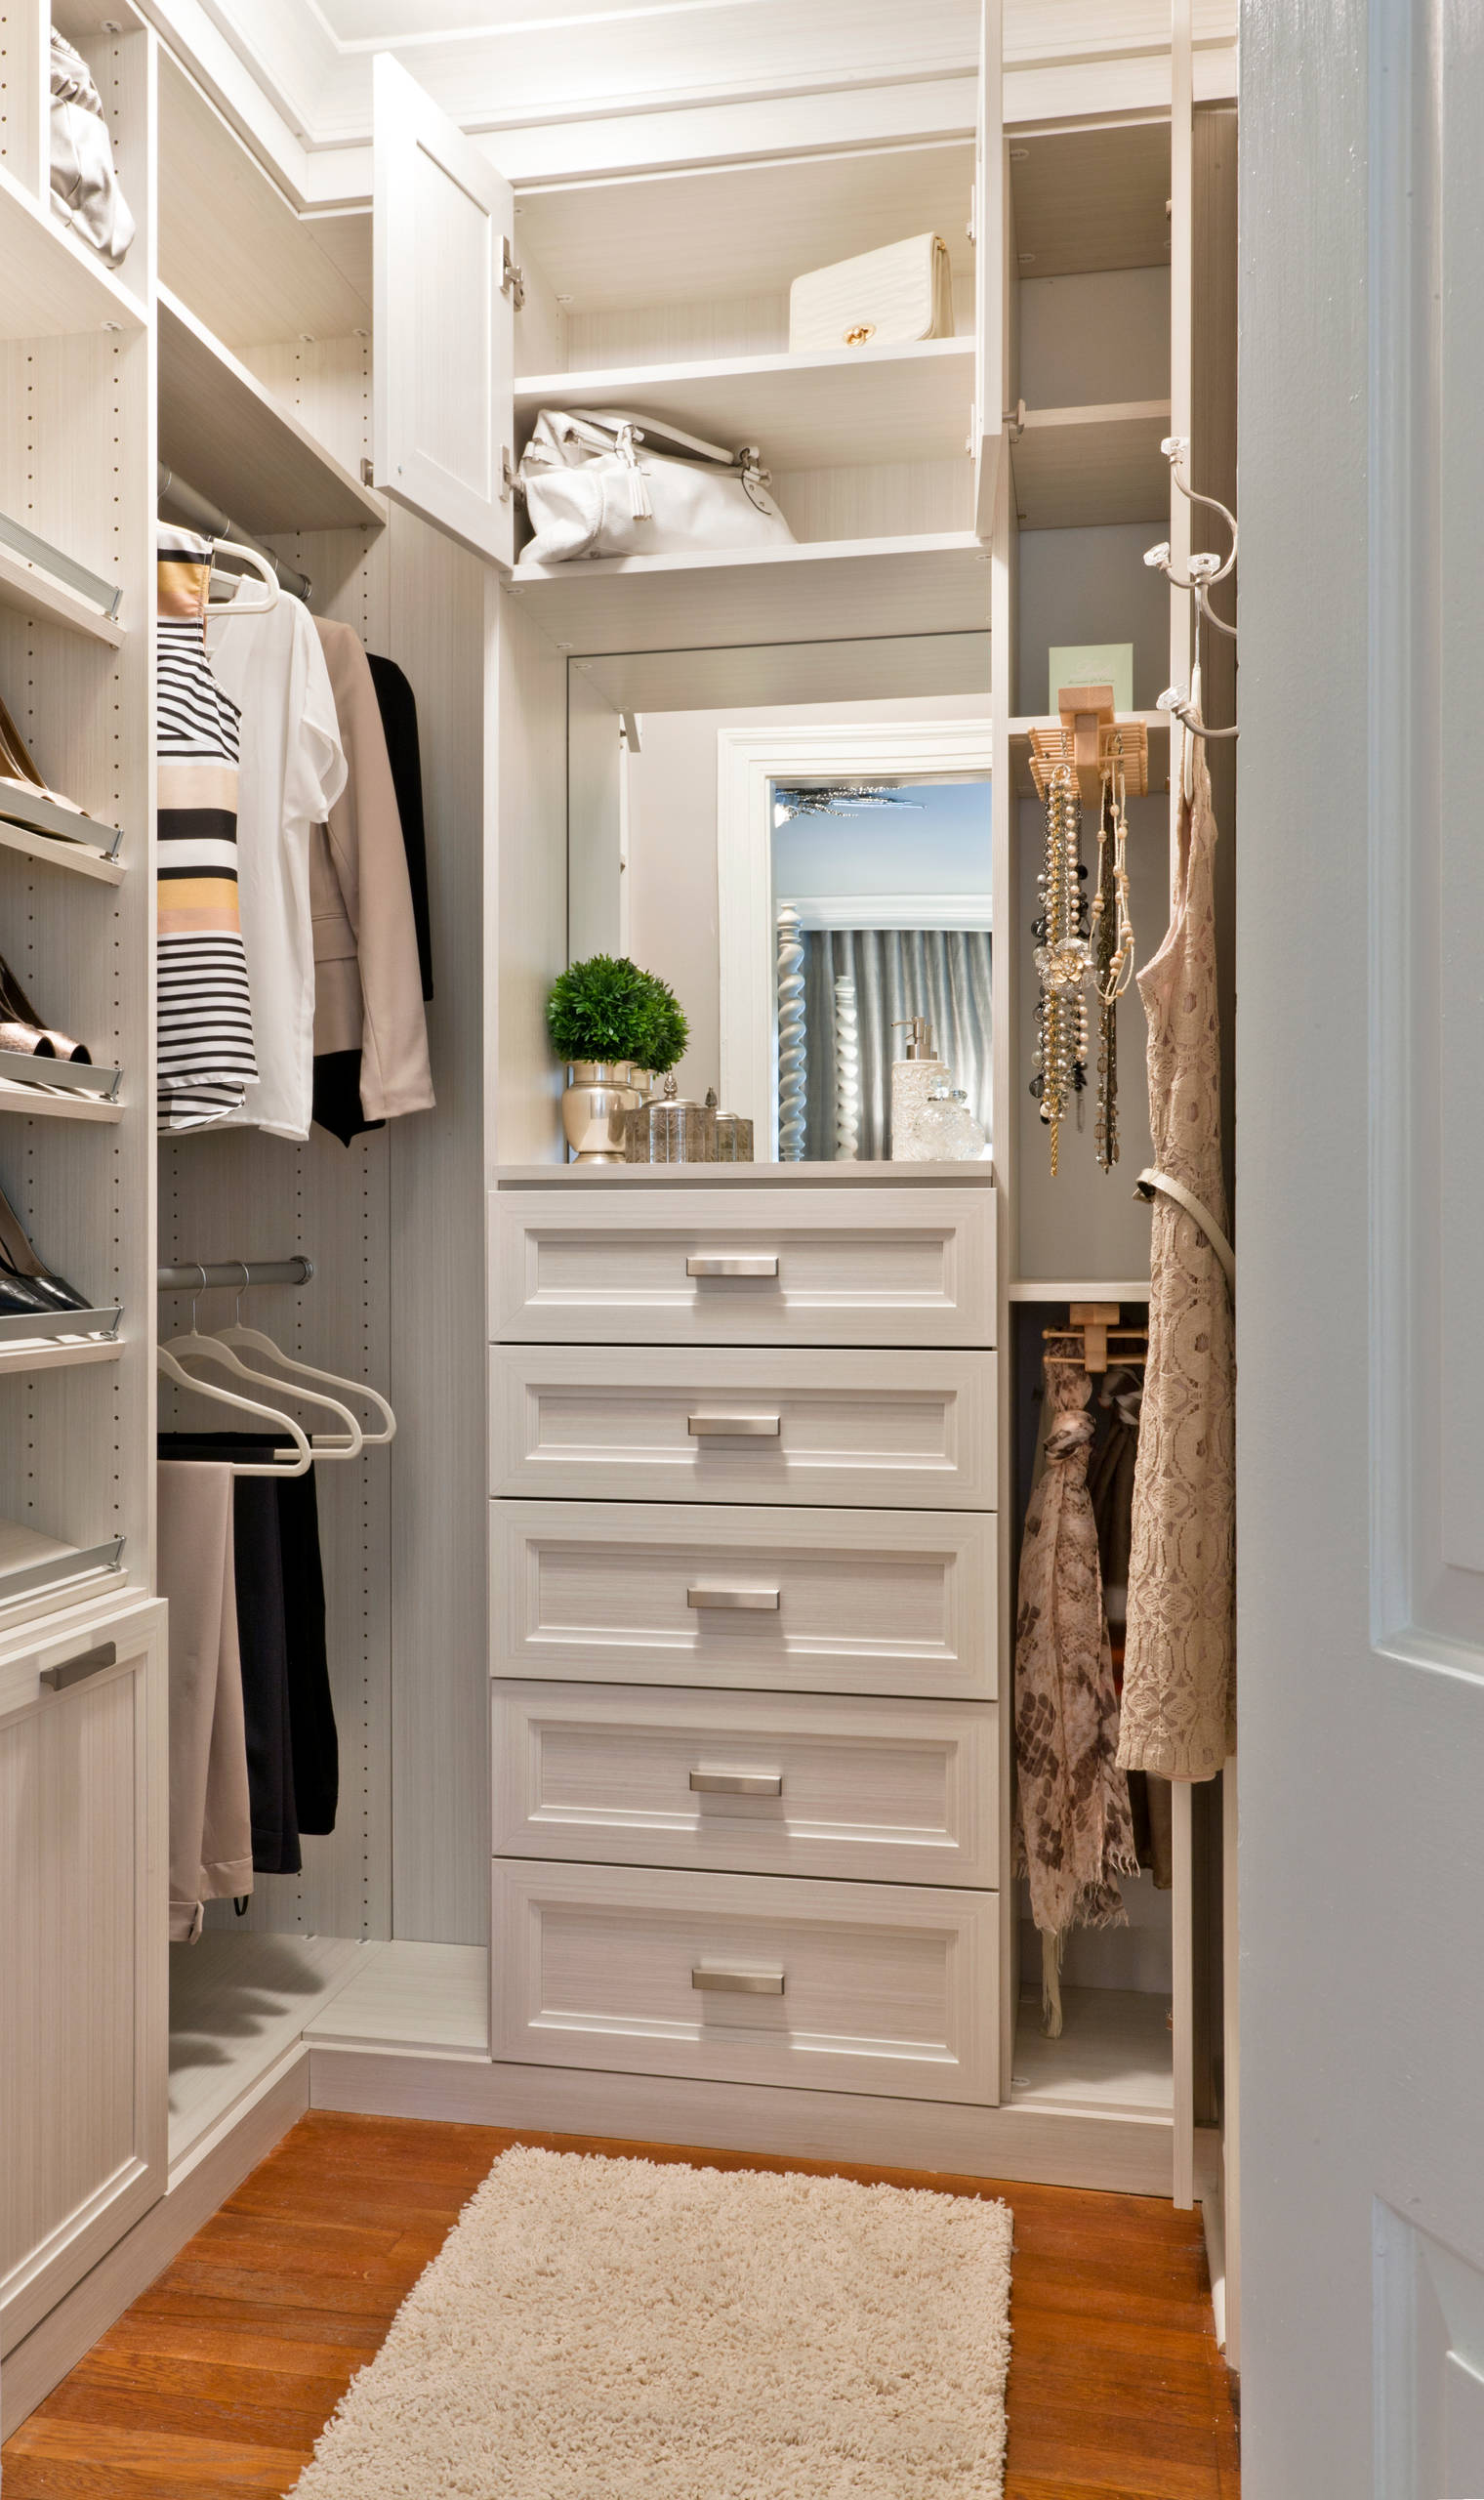 Walk In Closet with Built In Dressers - Transitional - Closet